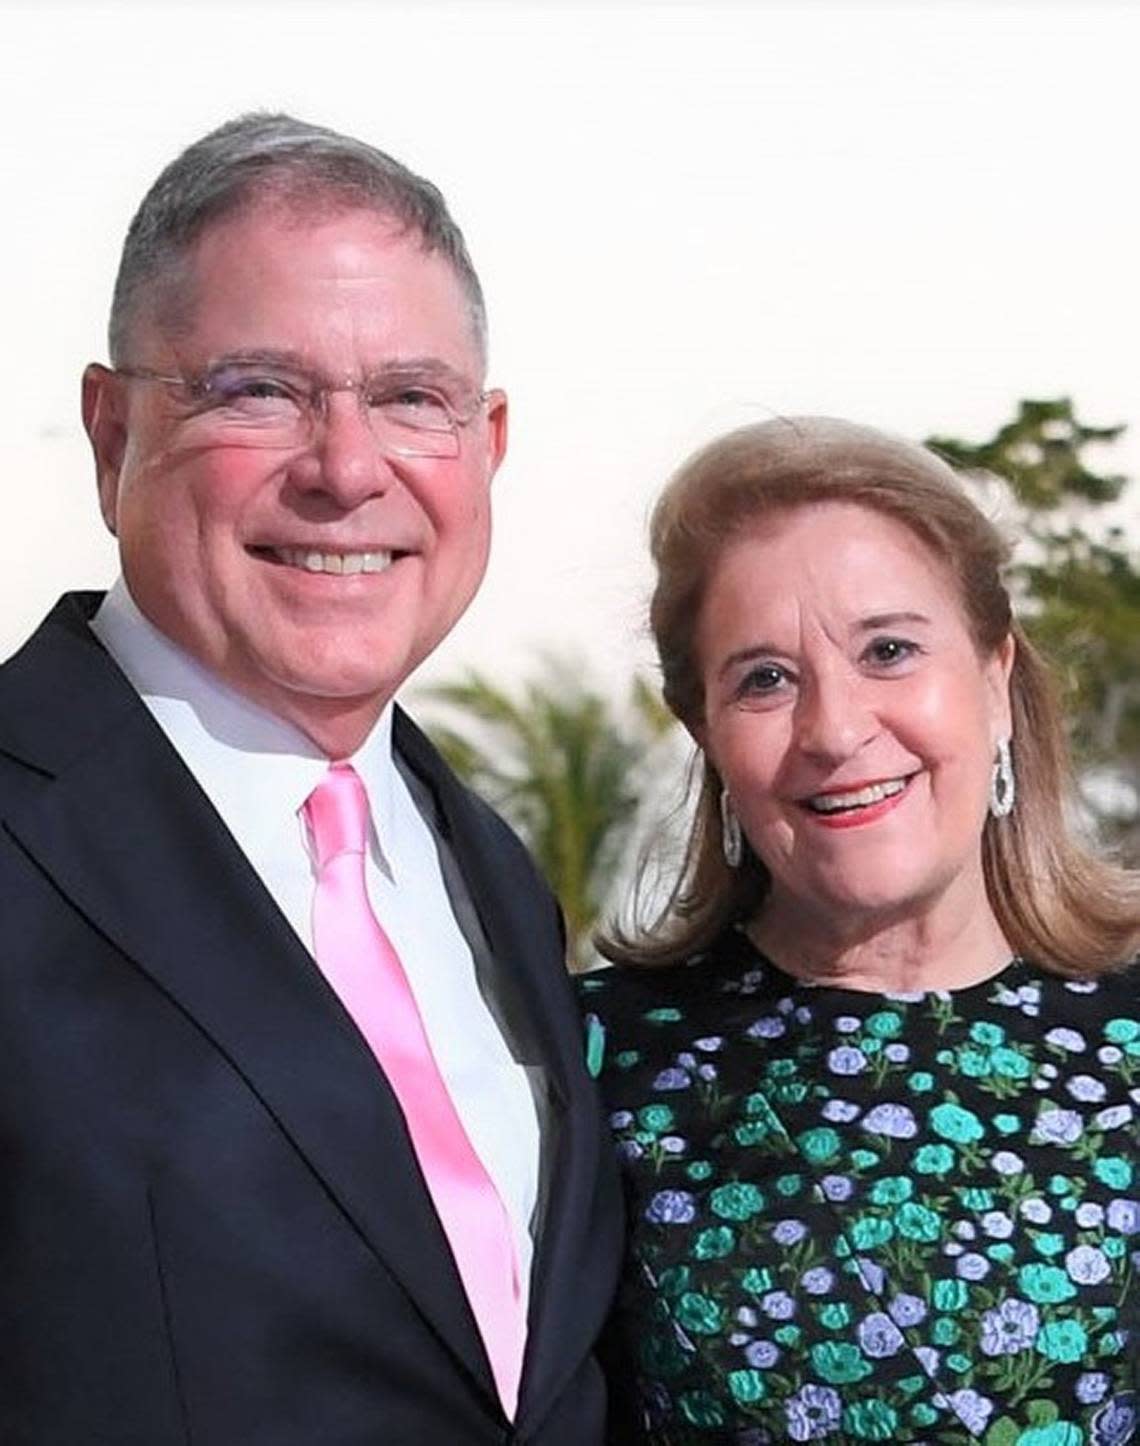 Alberto Ibargüen and Susana Ibargüen were married for 53 years. “I think she saw clearer than most that arts and culture really do define a place and a community,” her husband said for her obituary in 2021. Susana was a board president and trustee emeritus of Pérez Art Museum of Miami.